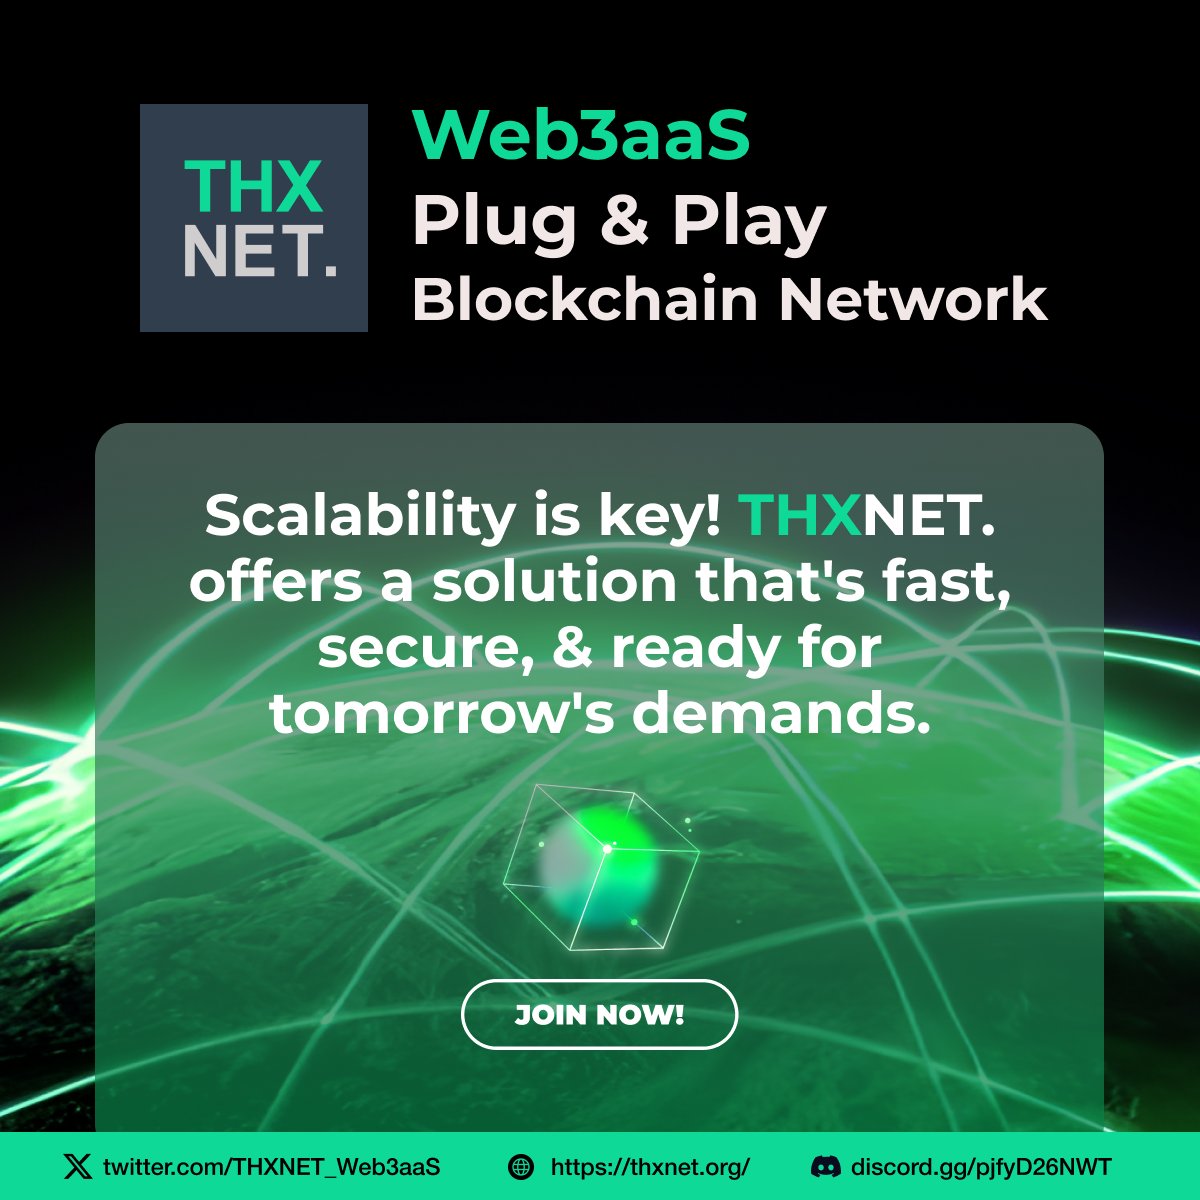 Scalability is key! THXNET. offers a solution that's fast, secure, & ready for tomorrow's demands. 👋Say goodbye to network issues. 💼🚀 #THXNET #Blockchain